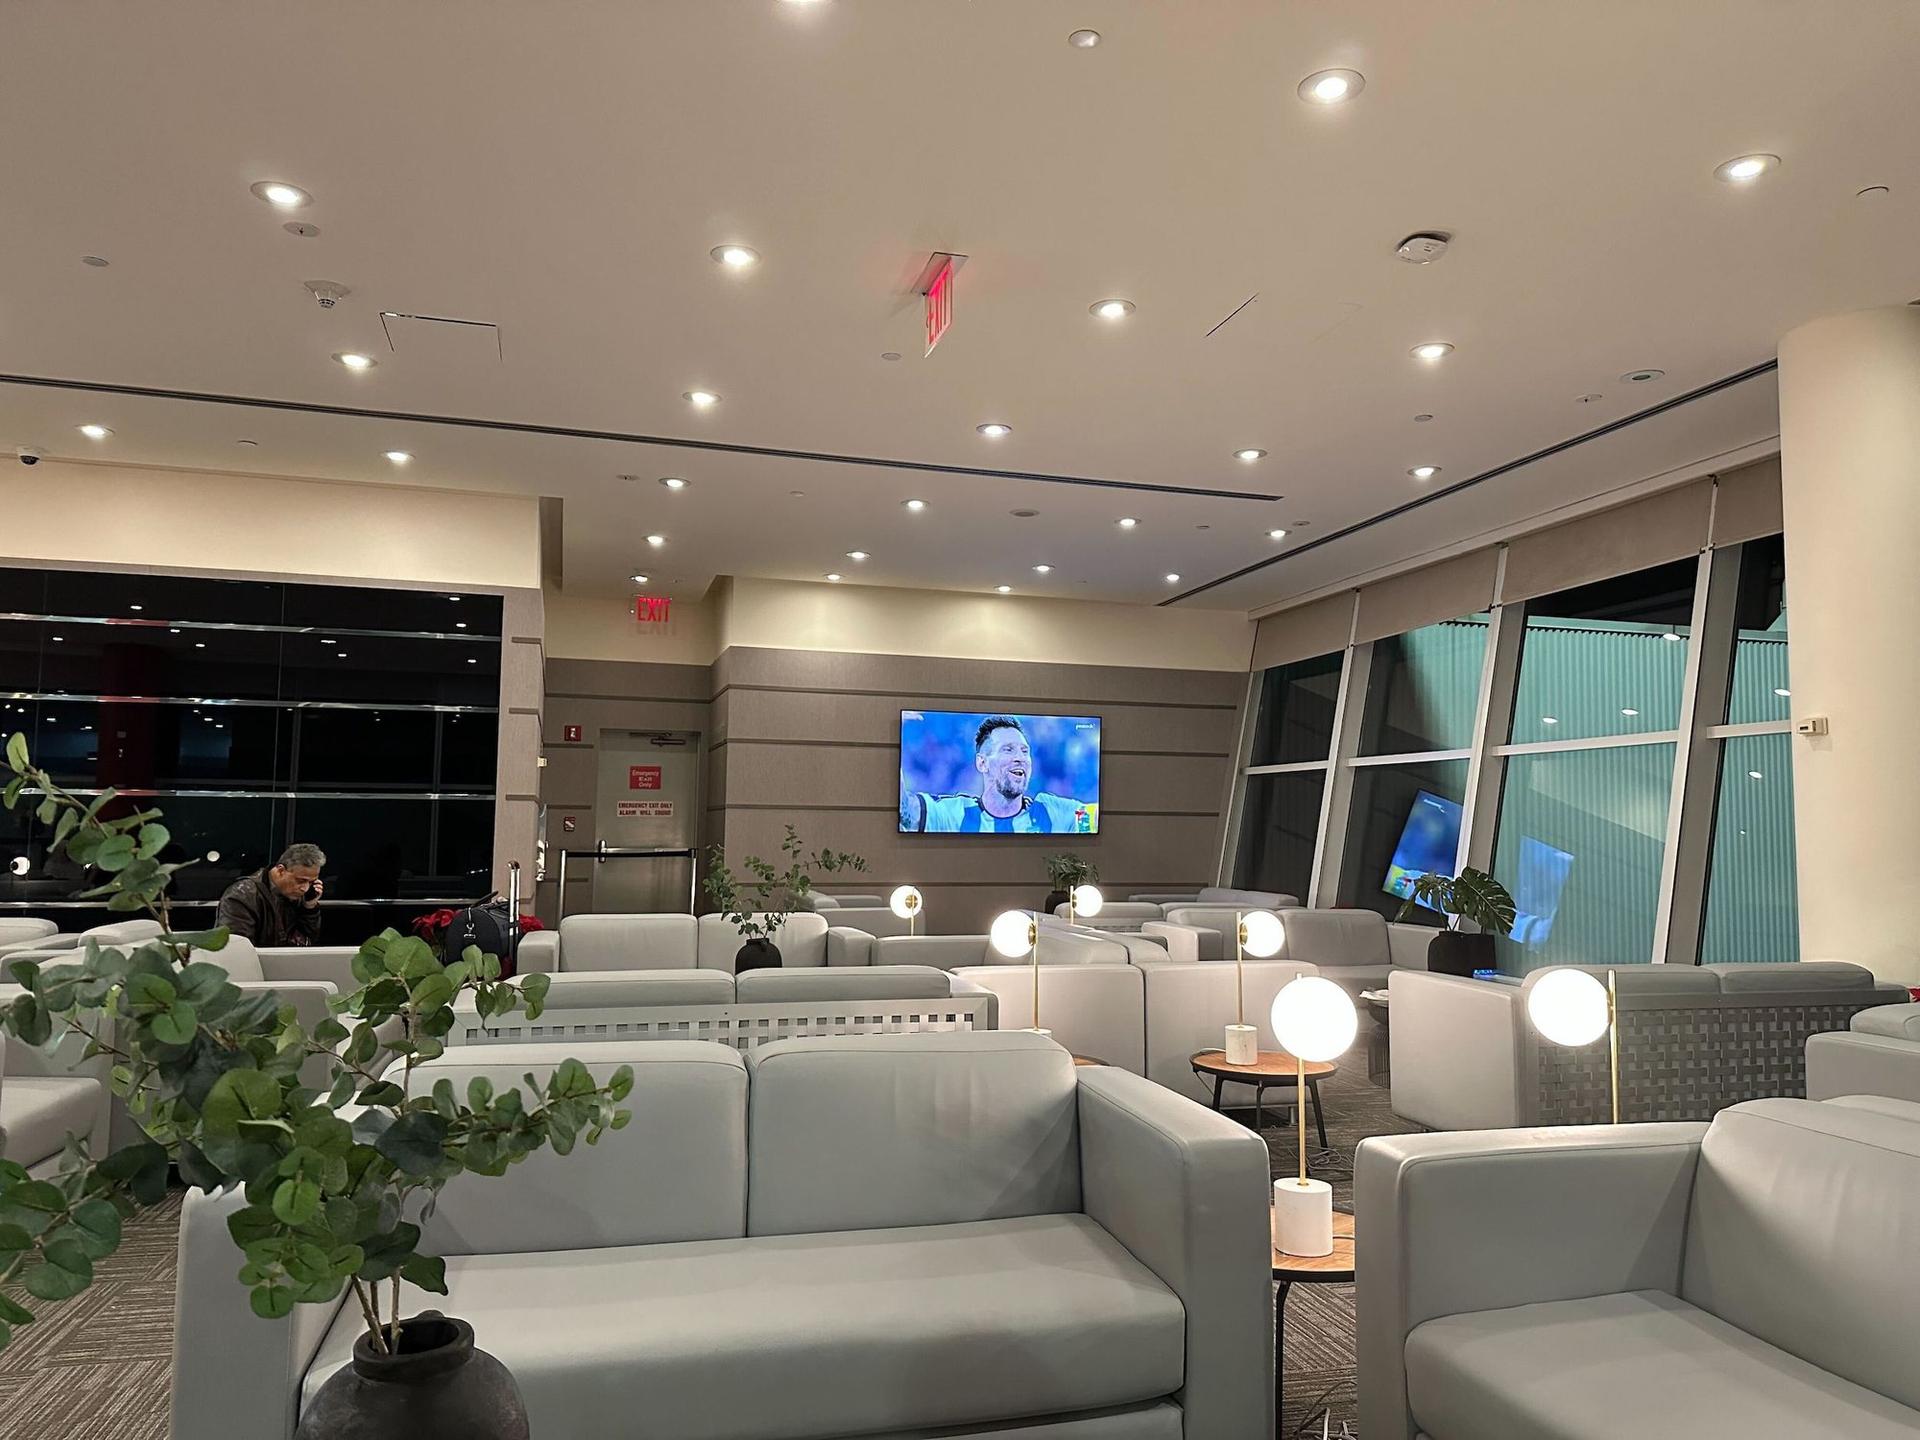 Turkish Airlines Lounge New York image 6 of 18